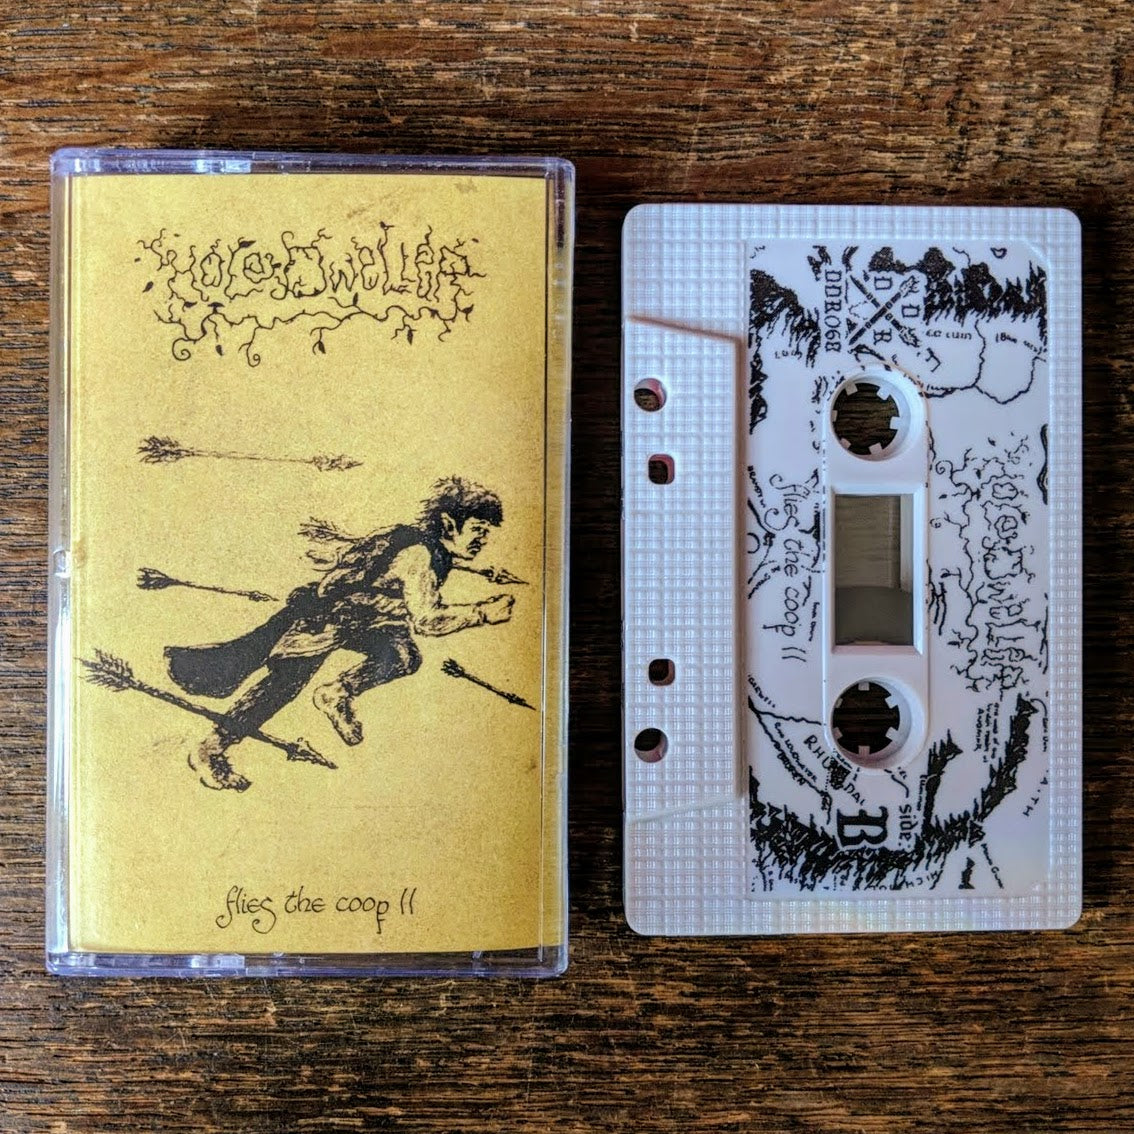 [SOLD OUT] HOLE DWELLER "Flies the Coop II" Cassette Tape